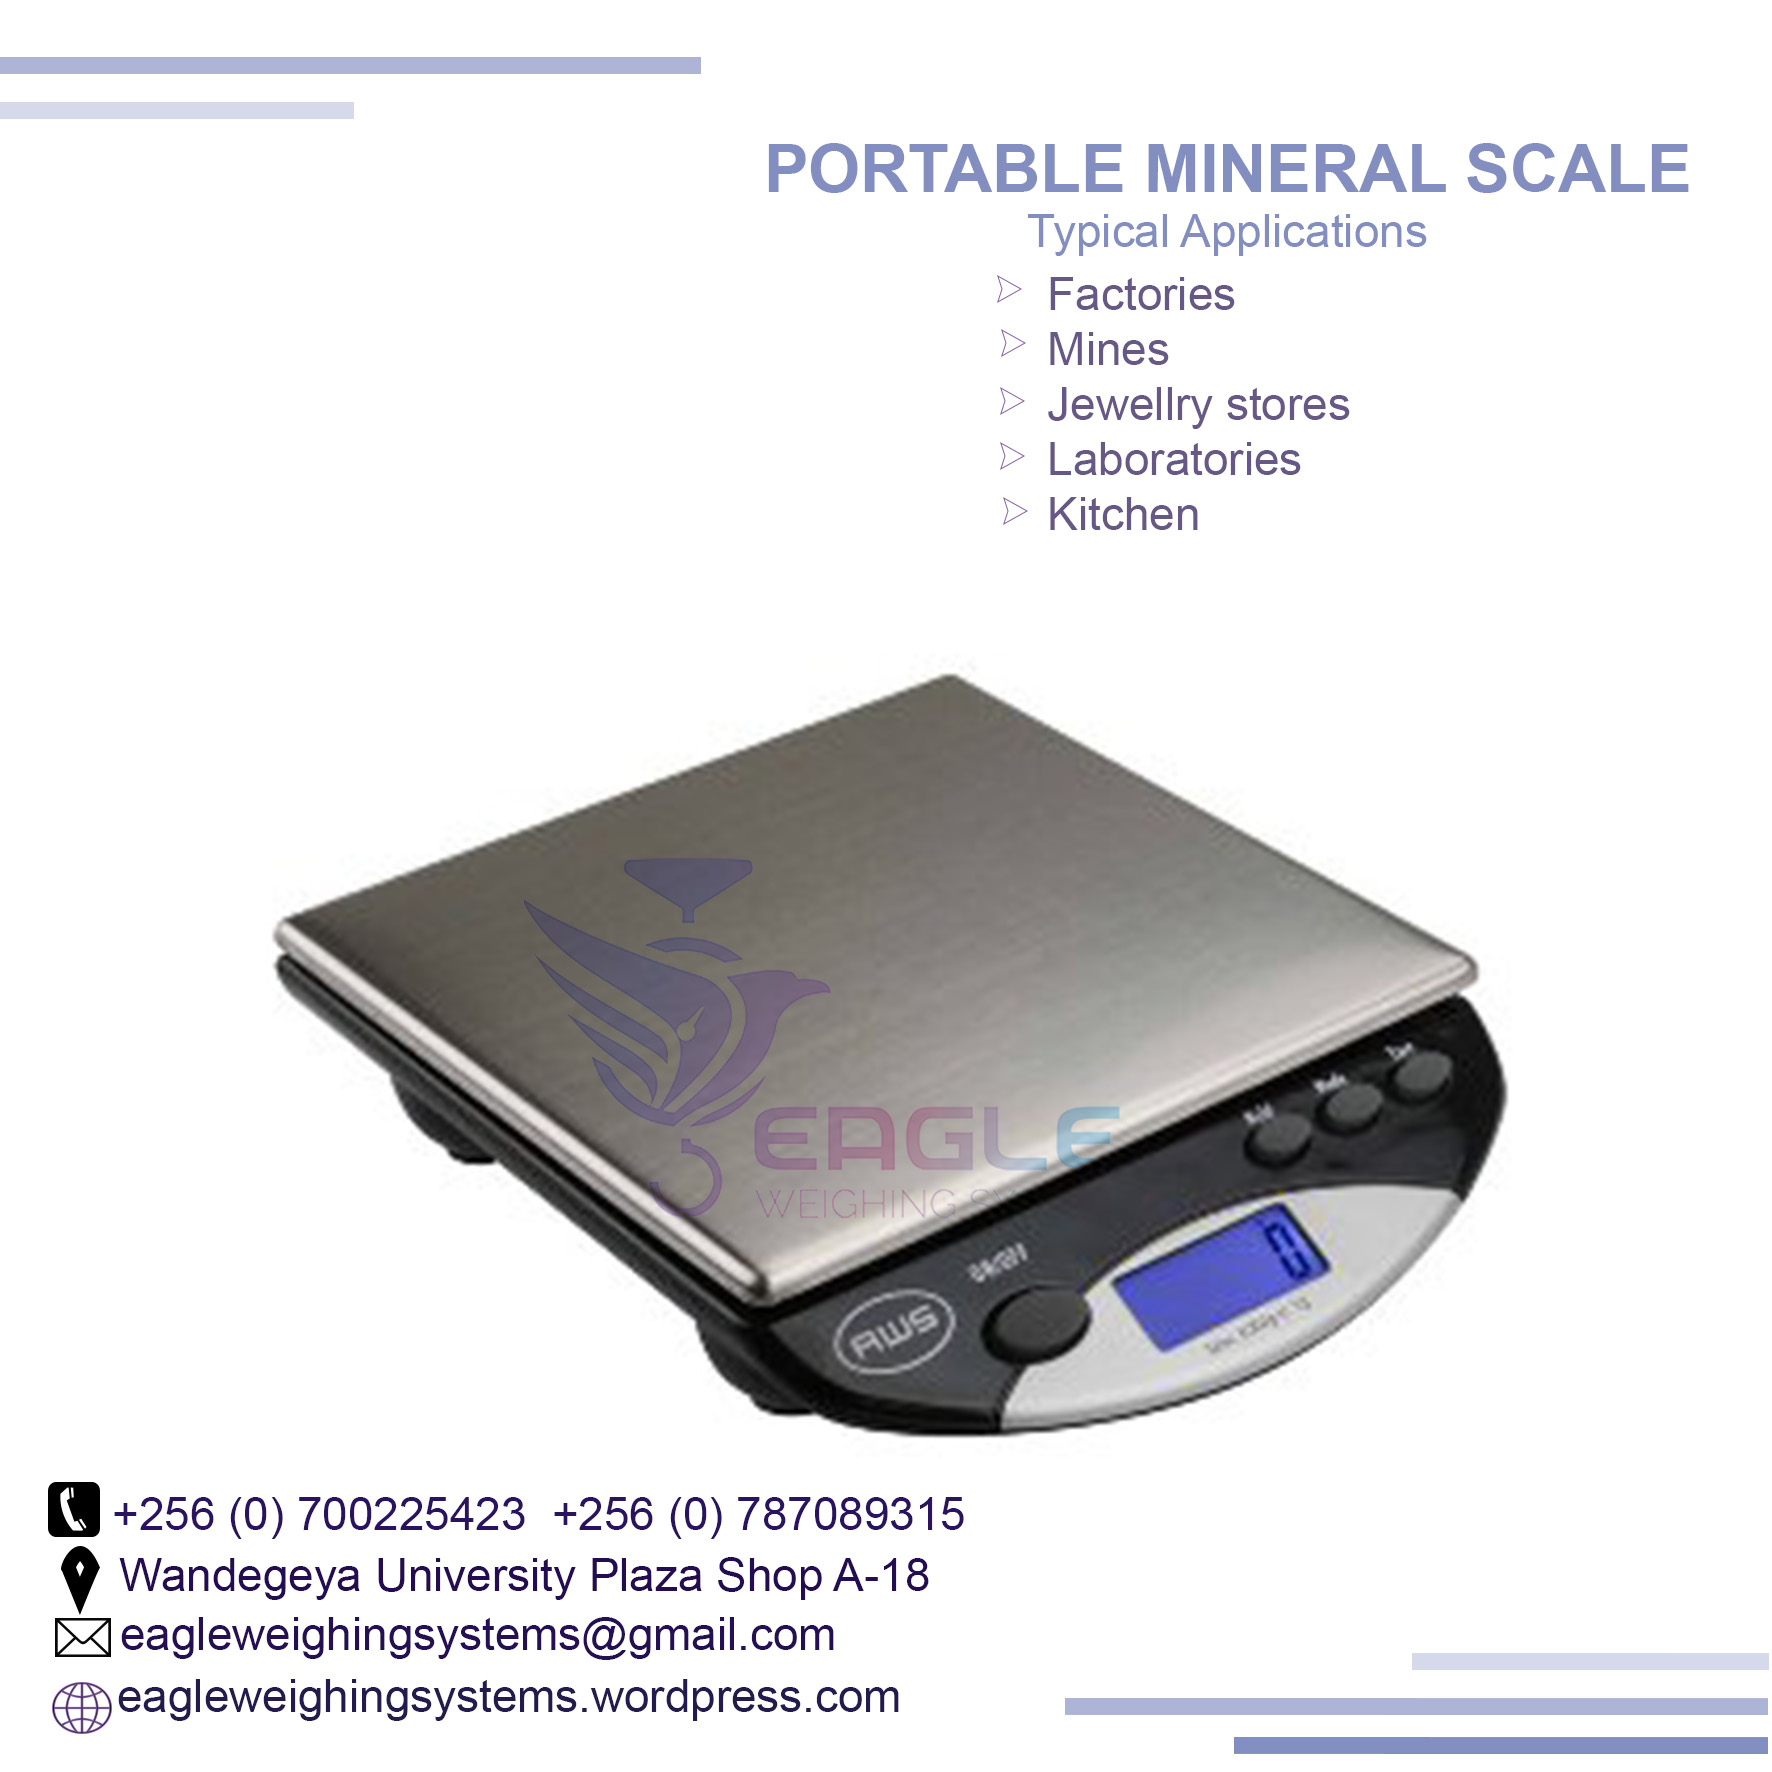 Stainless steel material Portable mineral, jewelry weighing scales in Kampala Uganda, Kampala Central Division, Central, Uganda